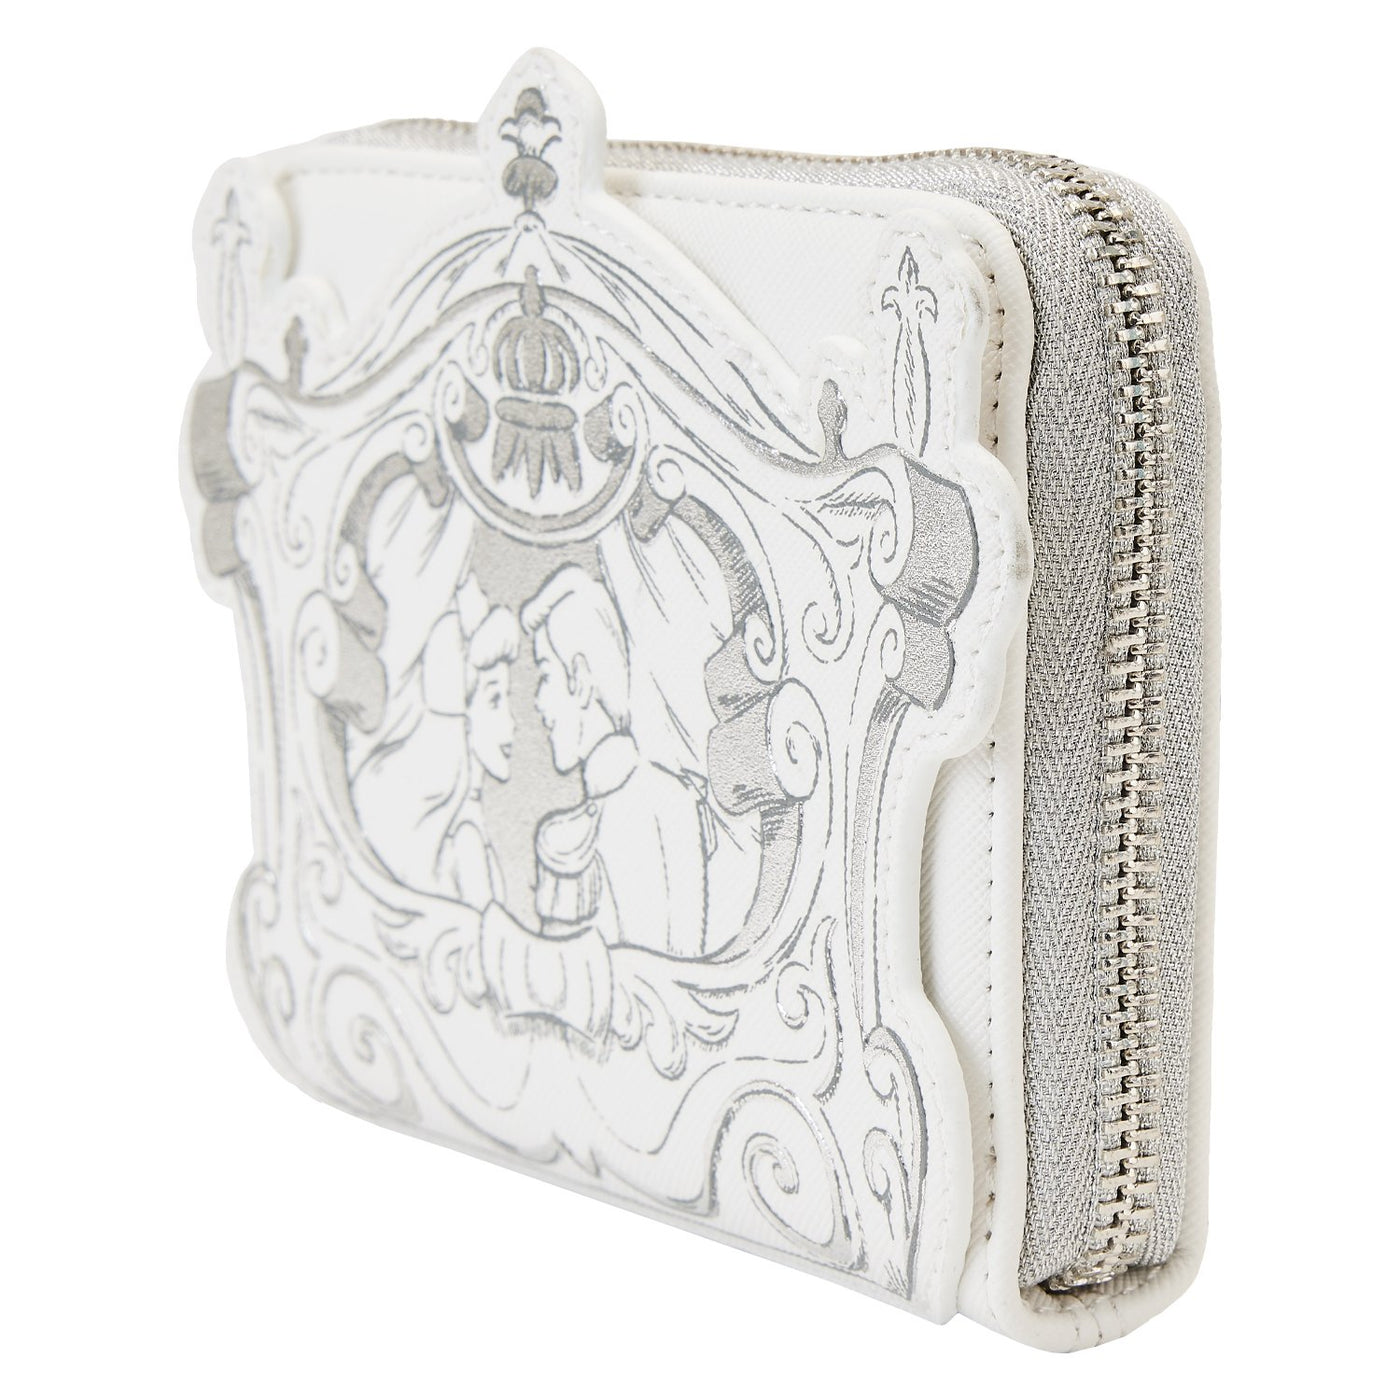 Loungefly Disney Cinderella Happily Ever After Zip-Around Wallet - Side View - 671803391383